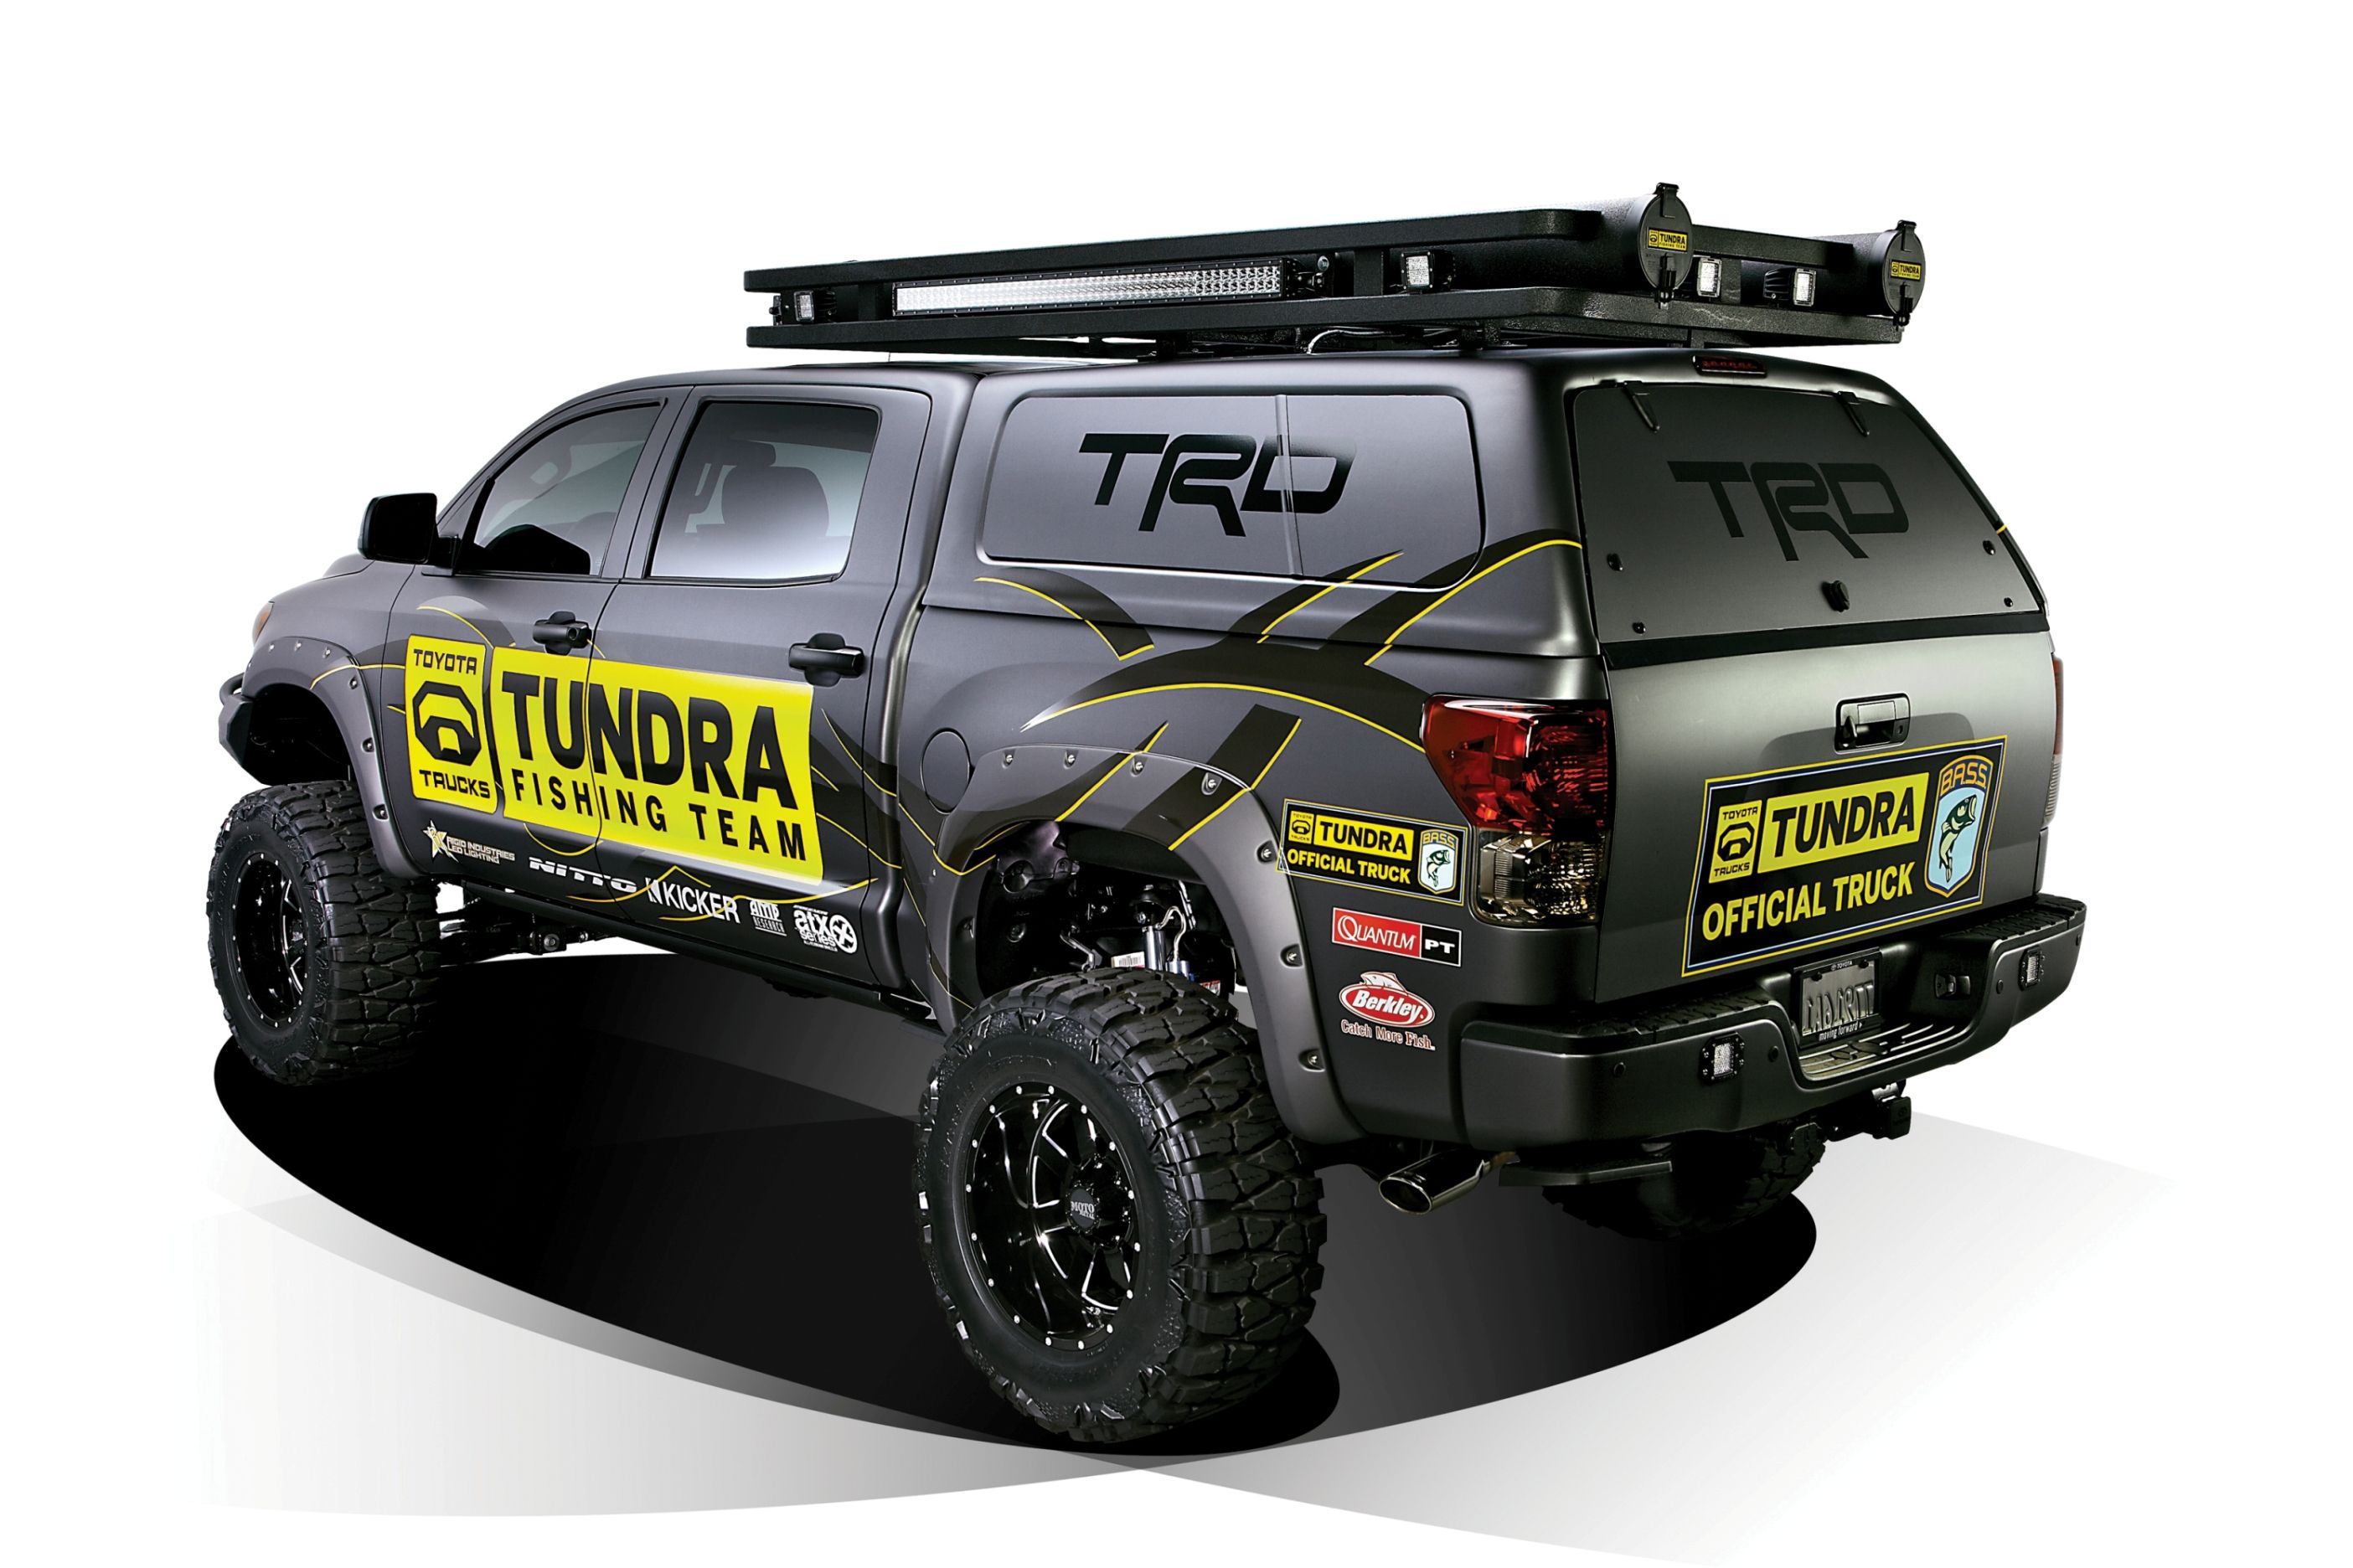 2013 Toyota Tundra Ultimate Fishing Concept